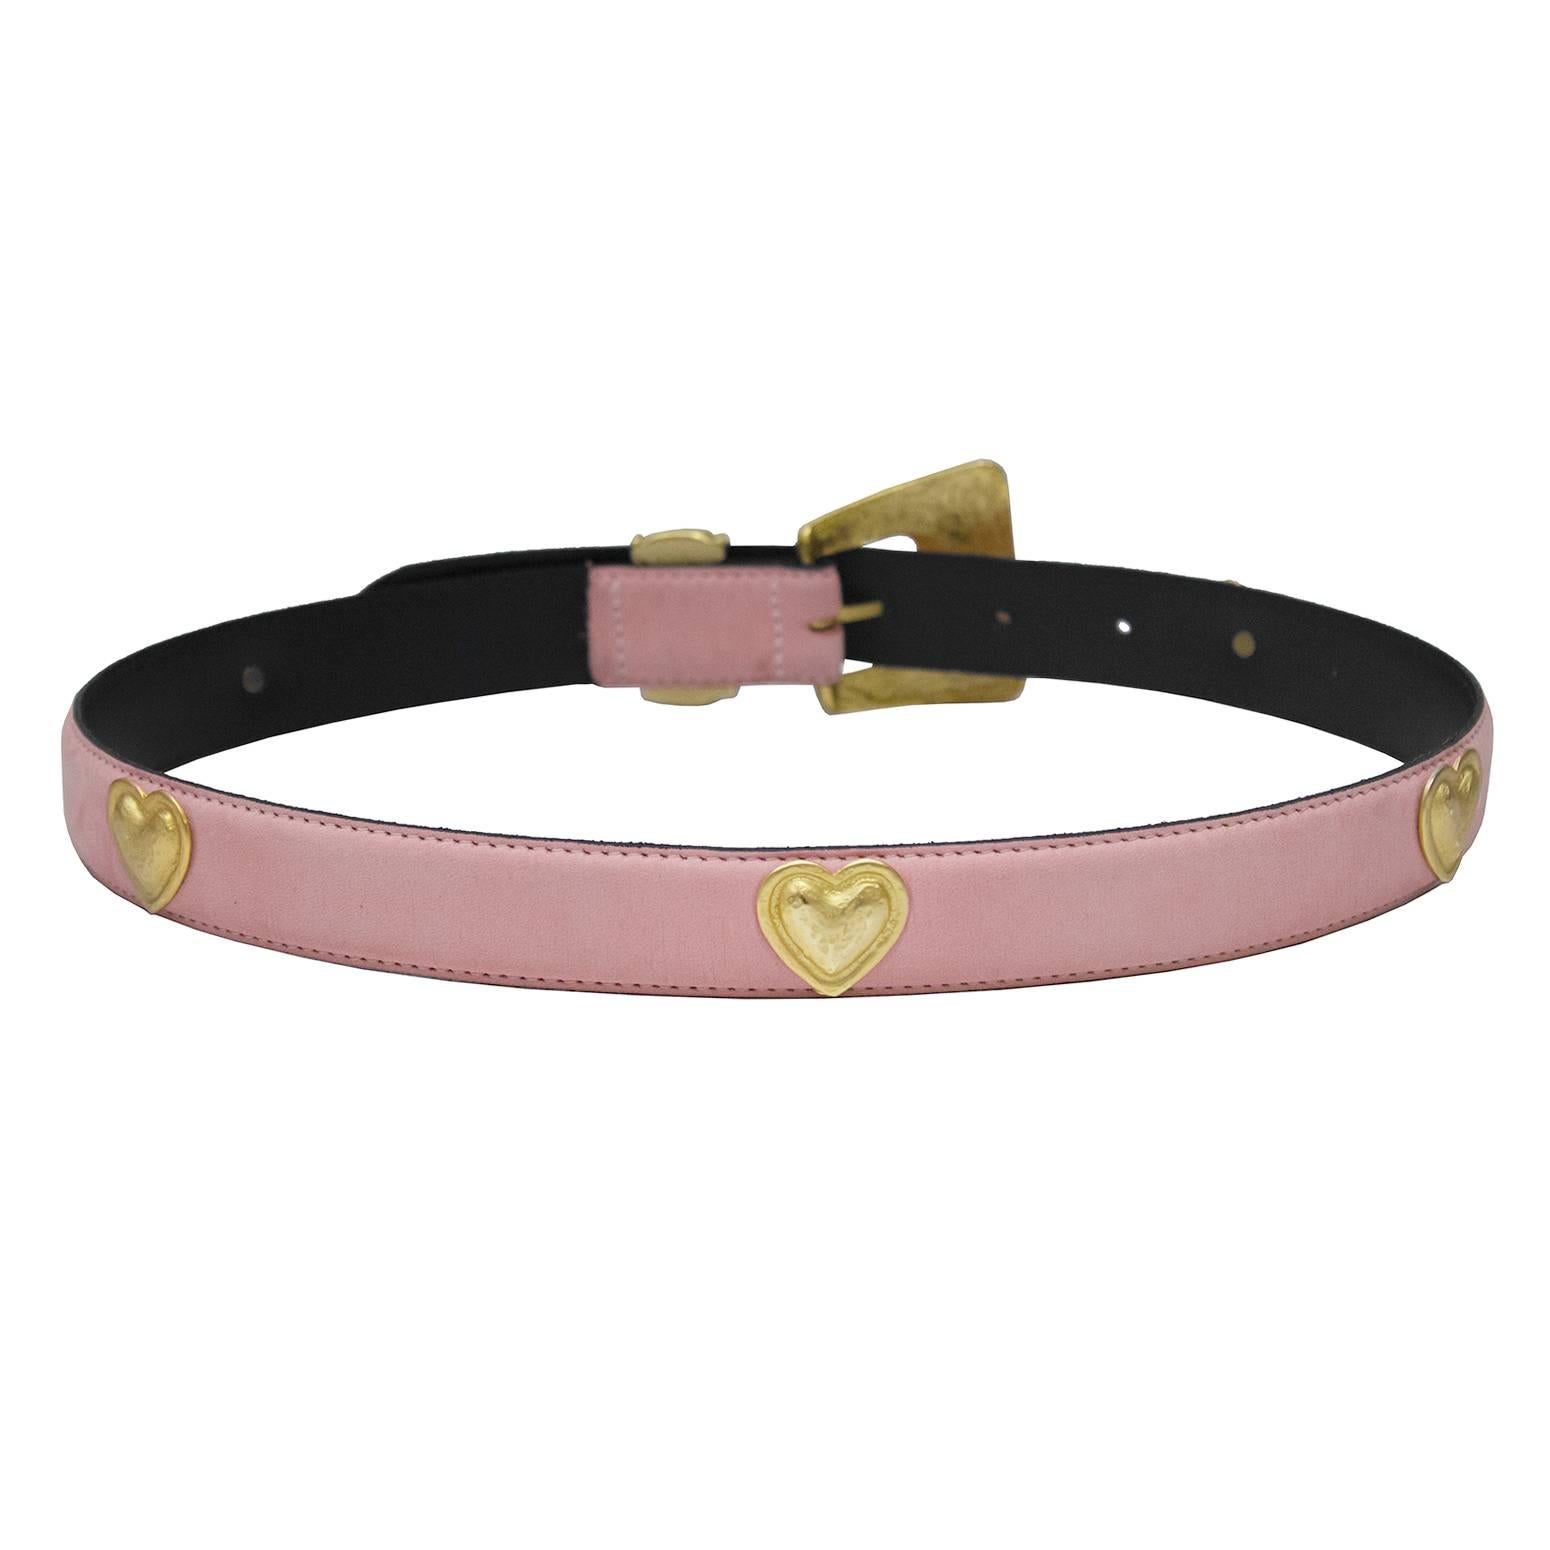 Very Versace inspired, this 1980's pink leather belt by the French label Abaco has goldtone hearts affixed to it and an oversized goldtone buckle. Hammered finish, in excellent condition. Designed and created in Paris, Abaco has been a well known